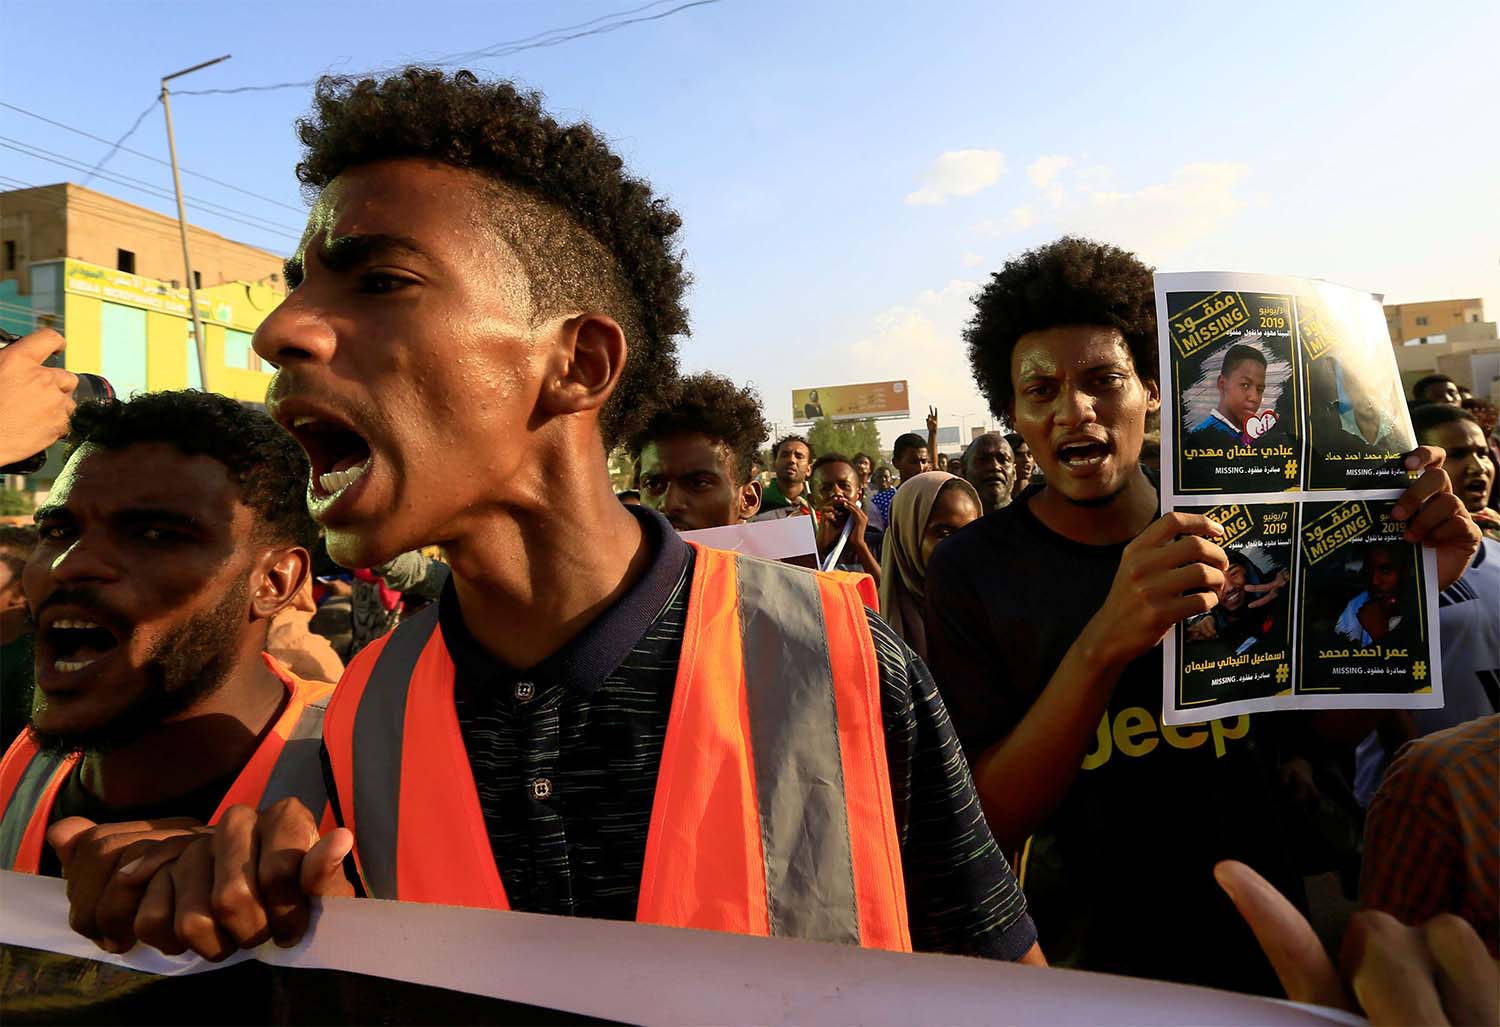 Sudanese protesters chant slogans during a rally calling for the former ruling party to be dissolved and for ex-officials to be put on trial in Khartoum